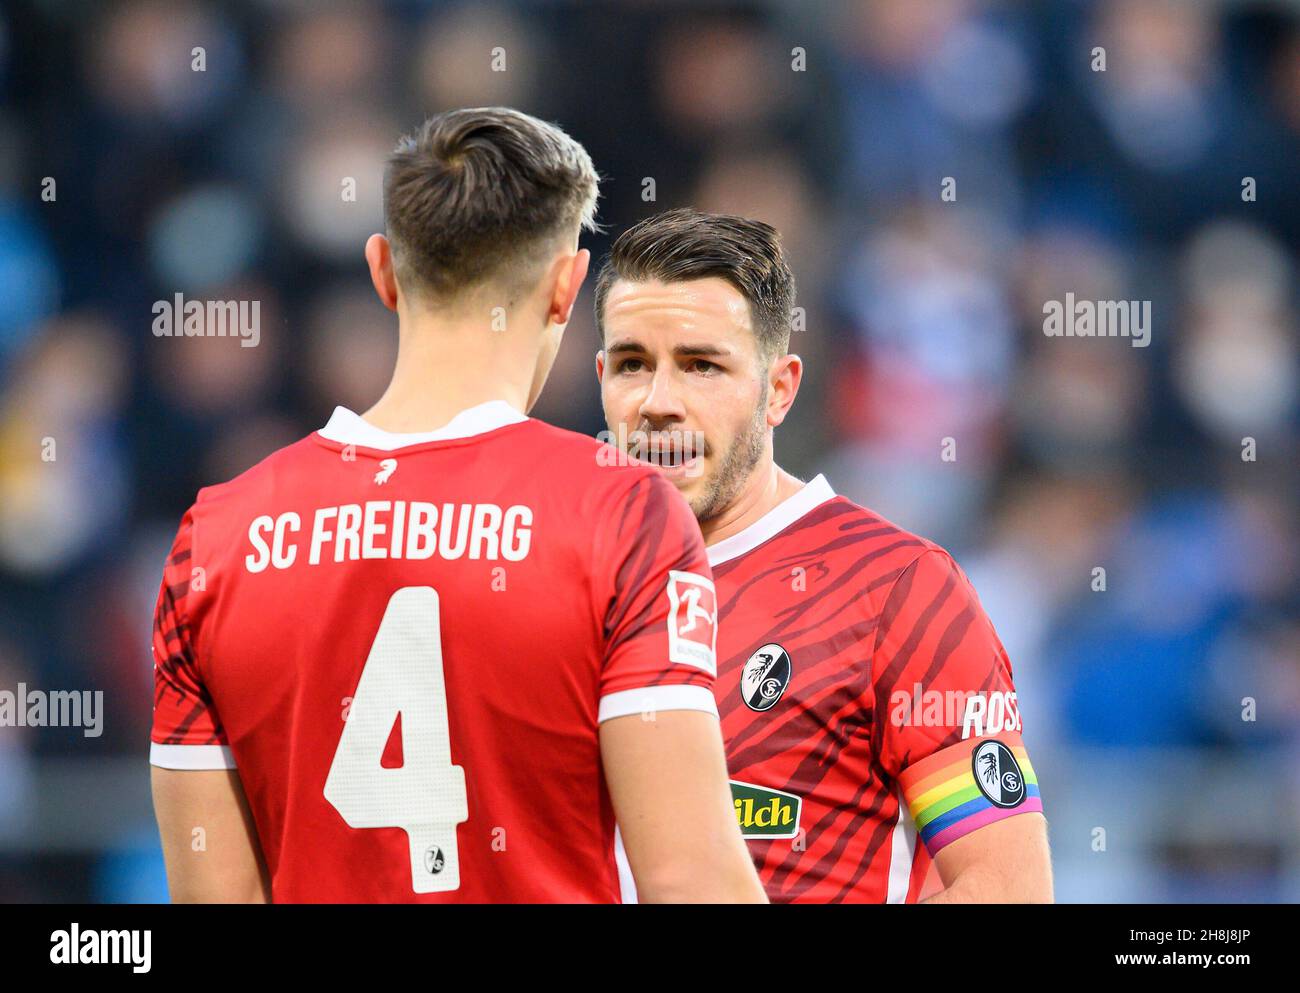 Christian GUENTER (GÃ nter, FR) in conversation with Nico SCHLOTTERBECK l. (FR), Soccer 1st Bundesliga, 13th matchday, VfL Bochum (BO) - SC Freiburg (FR) 2: 1, on November 27th, 2021 in Bochum/Germany. #DFL regulations prohibit any use of photographs as image sequences and/or quasi-video # Â Stock Photo